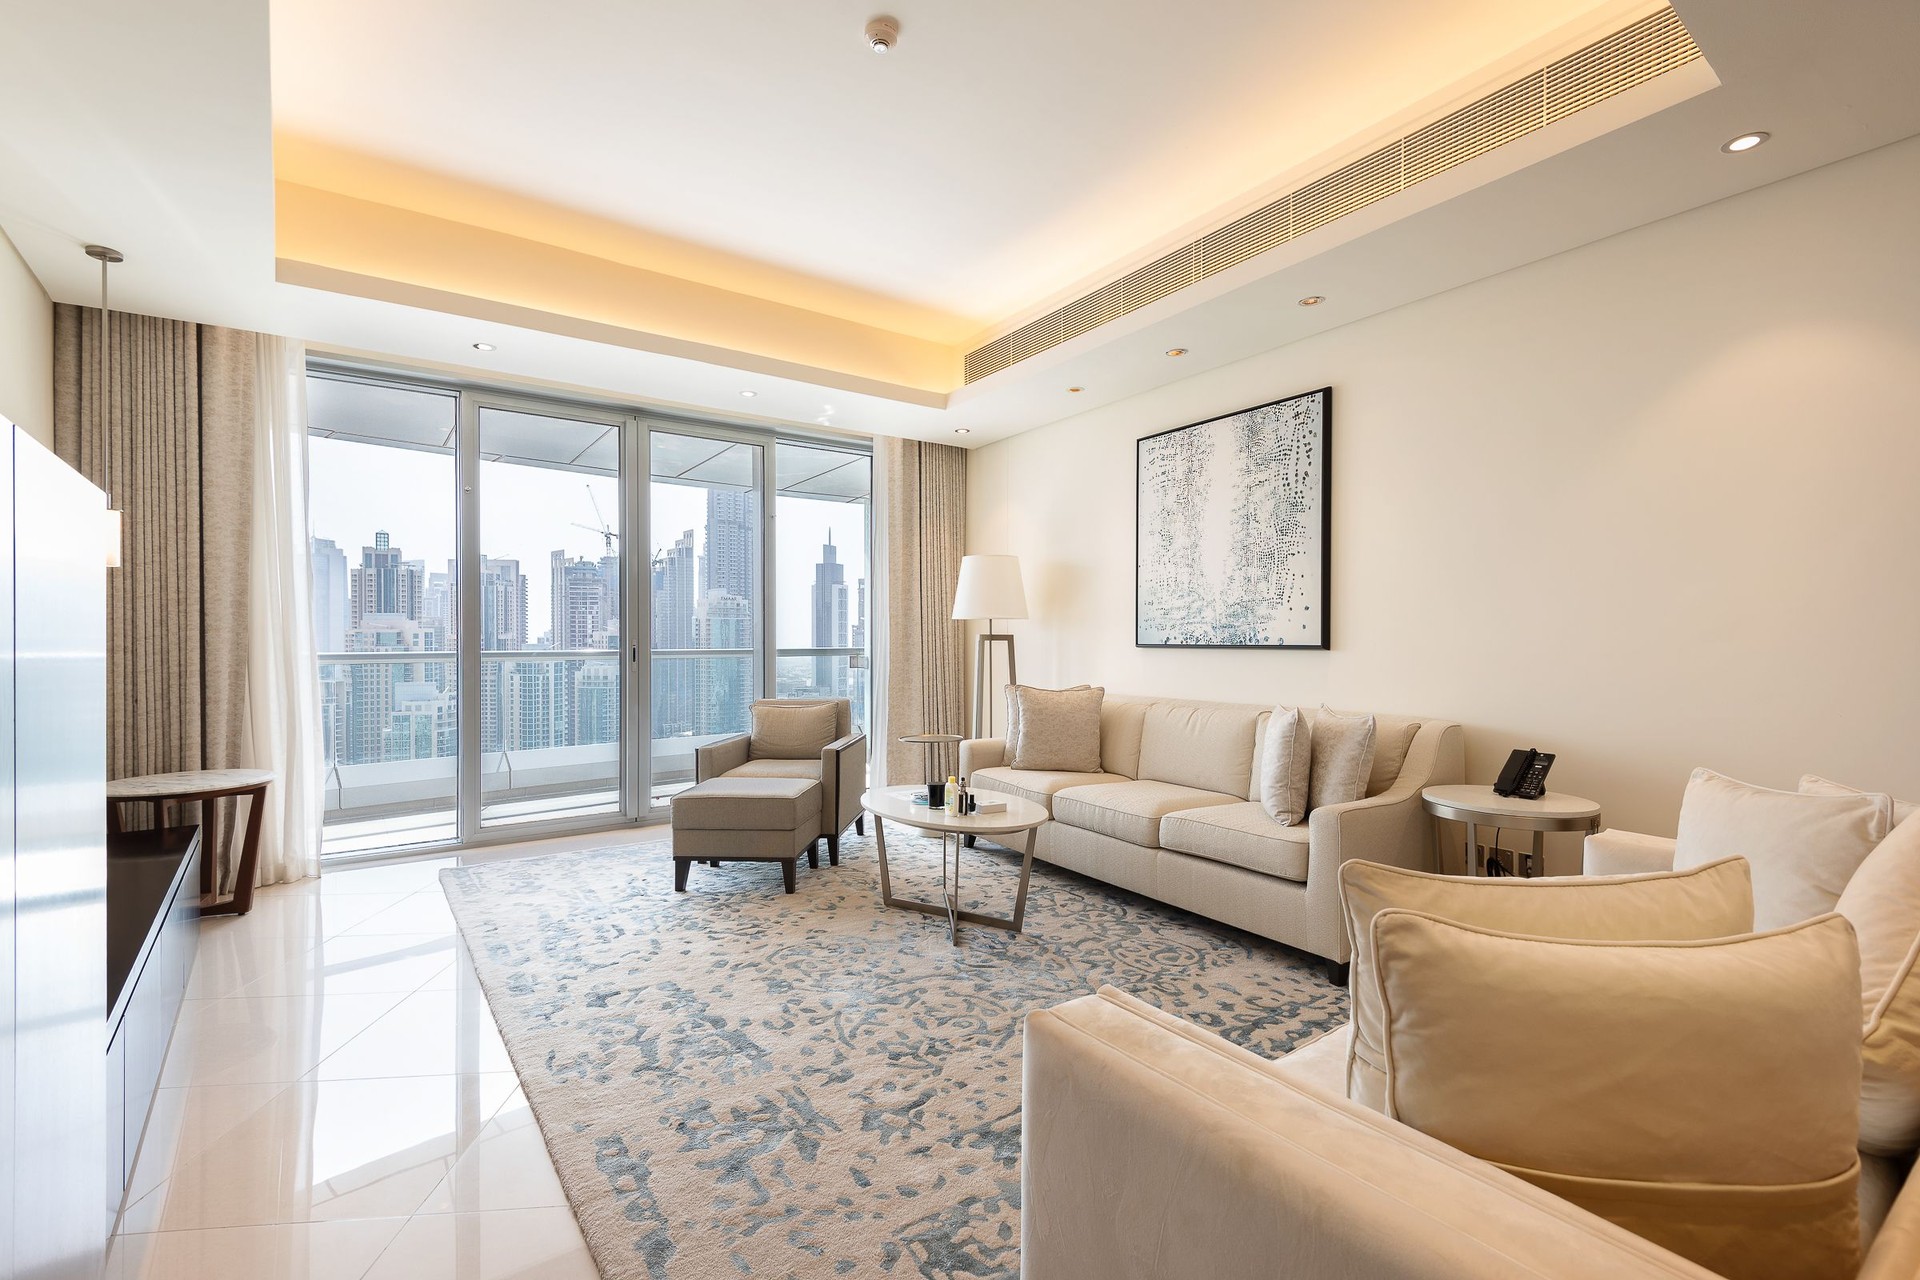 2 Bedroom Serviced Apartment in Downtown Dubai: Image 1